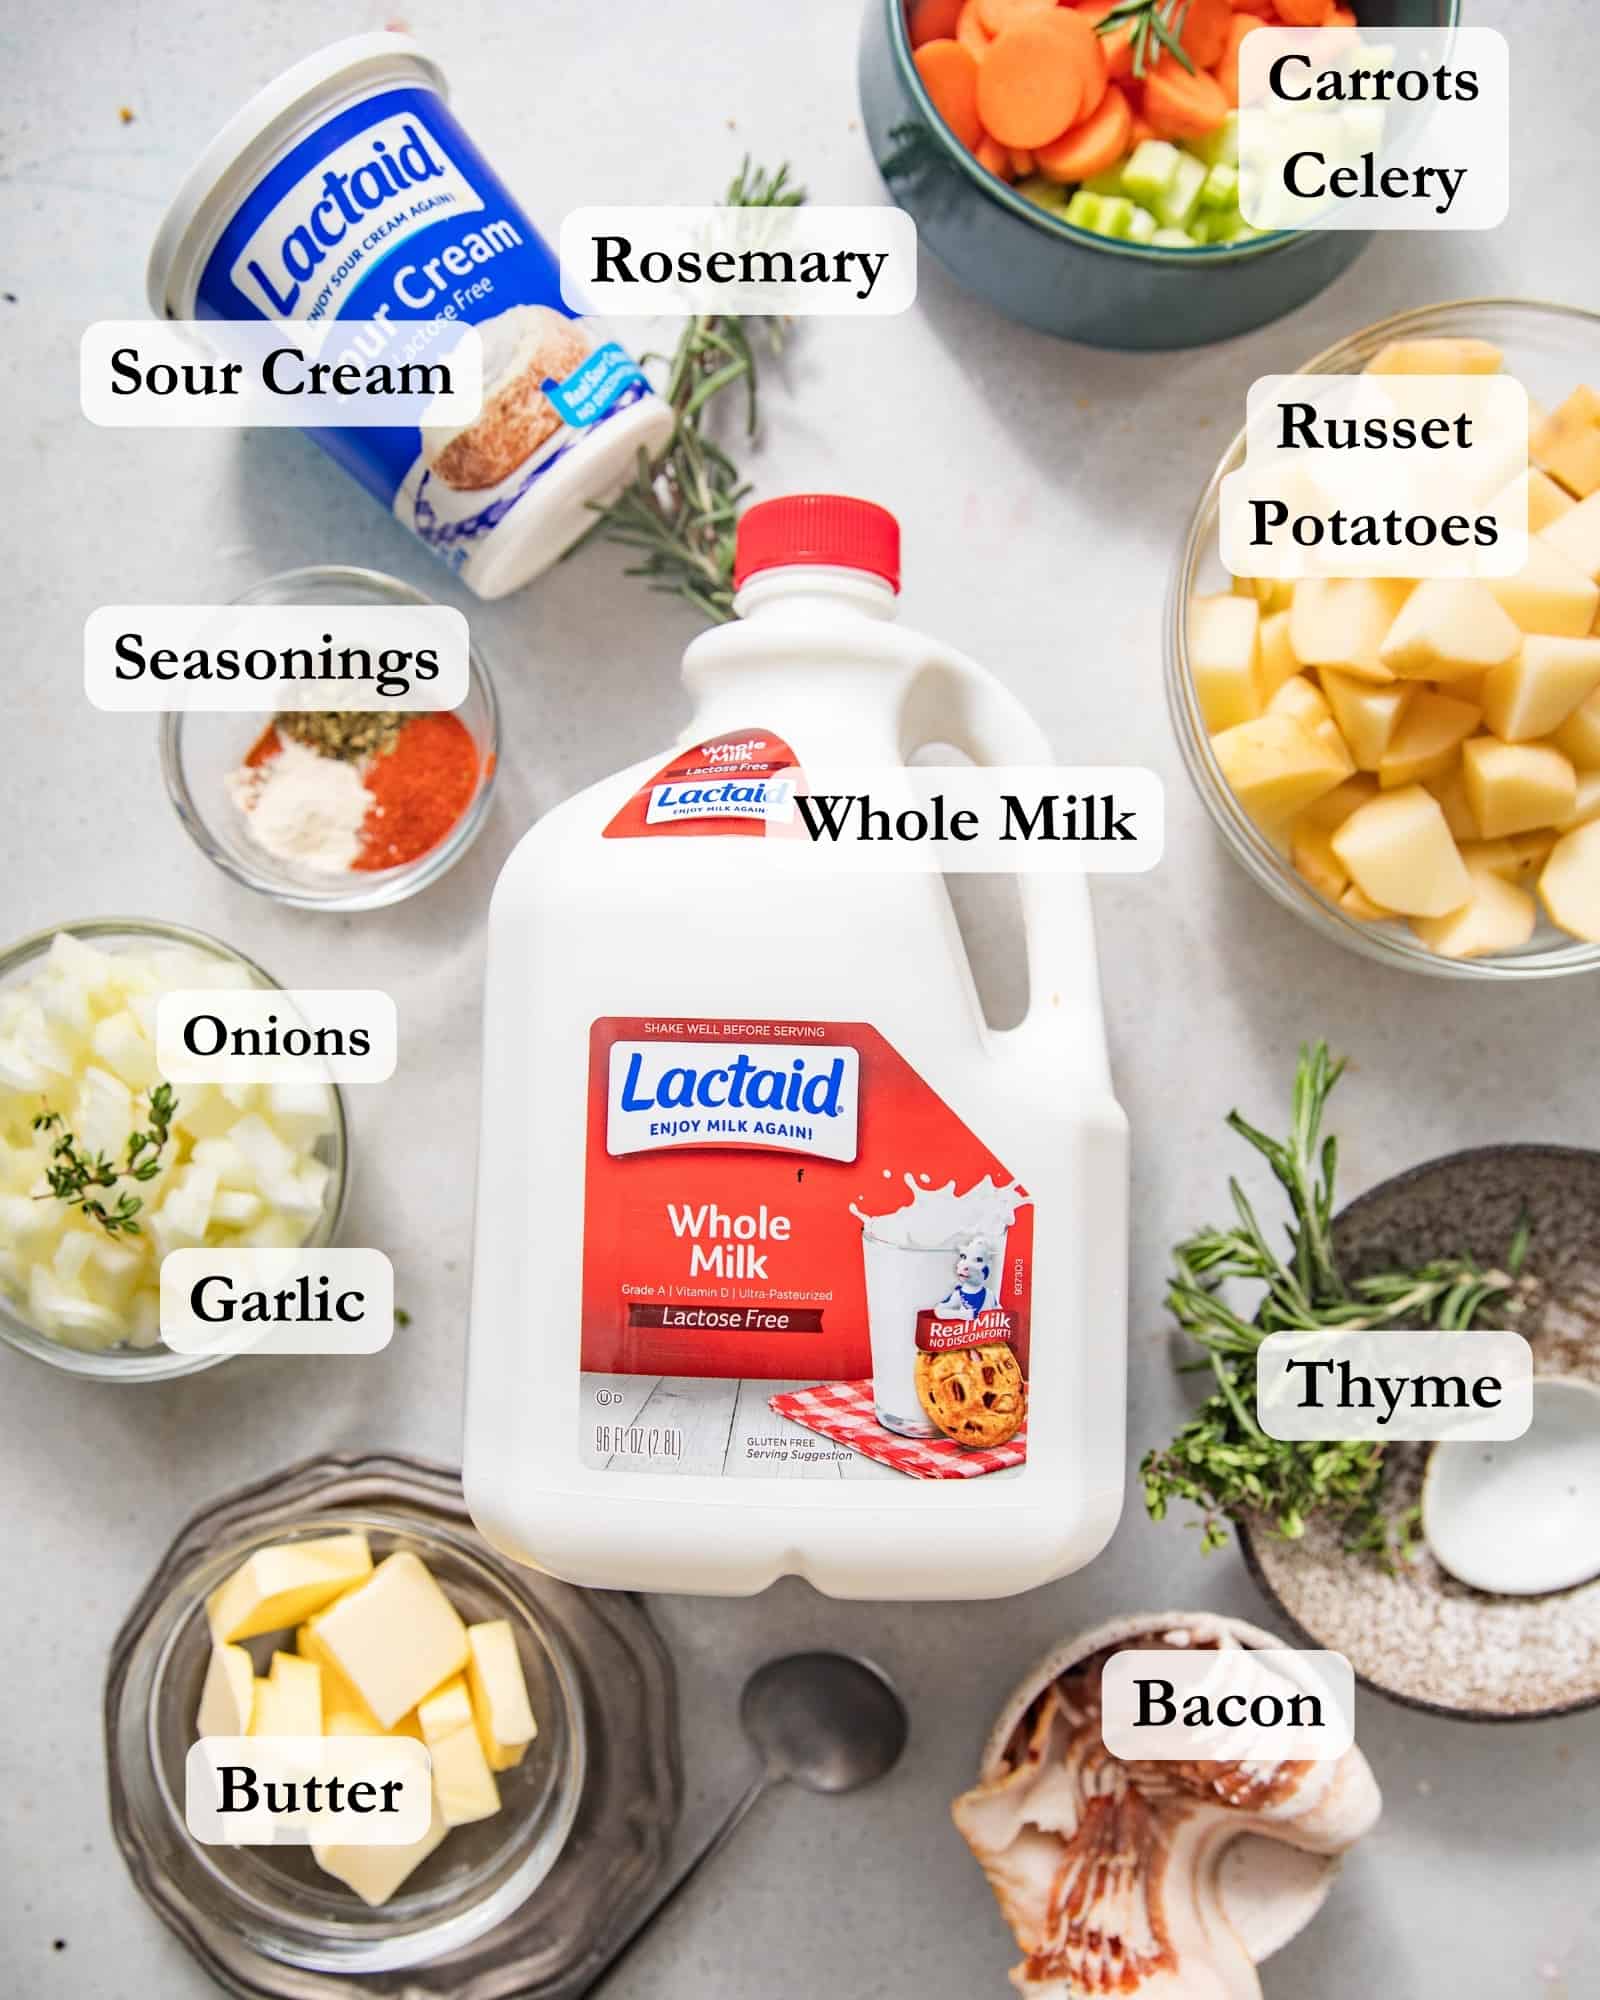 ingredients to make loaded baked potato soup on a white surface - russet potato, whole milk, bacon, butter, celery, carrots, thyme, rosemary, seasonings, onions, garlic, sour cream, and chicken bouillon paste.